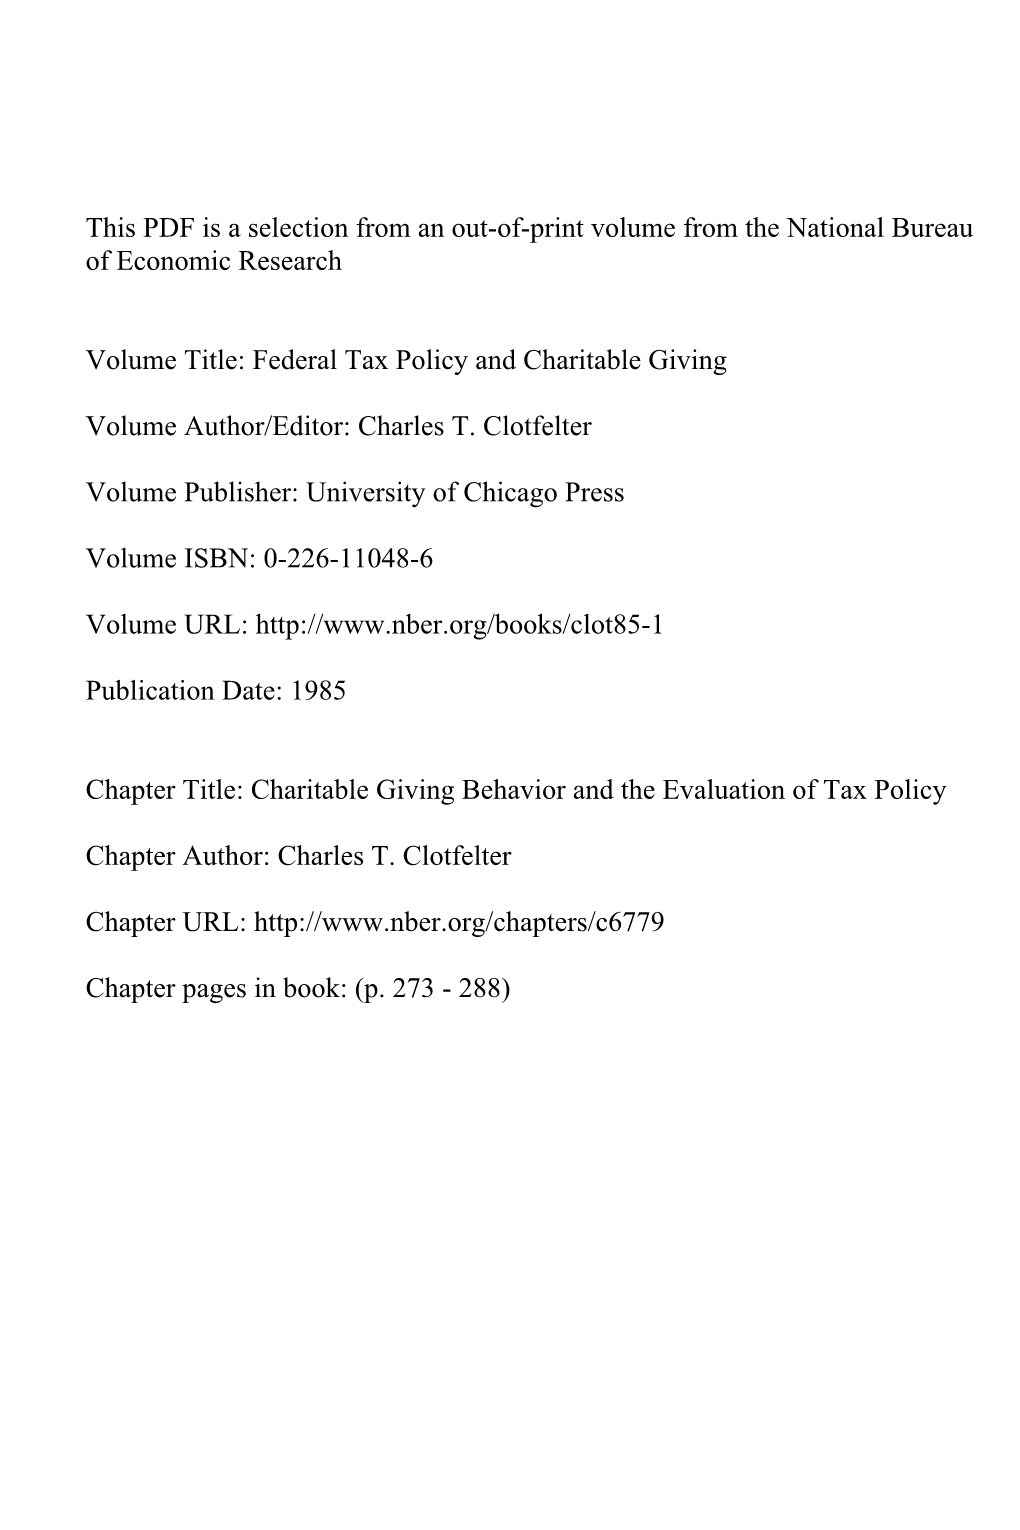 Charitable Giving Behavior and the Evaluation of Tax Policy